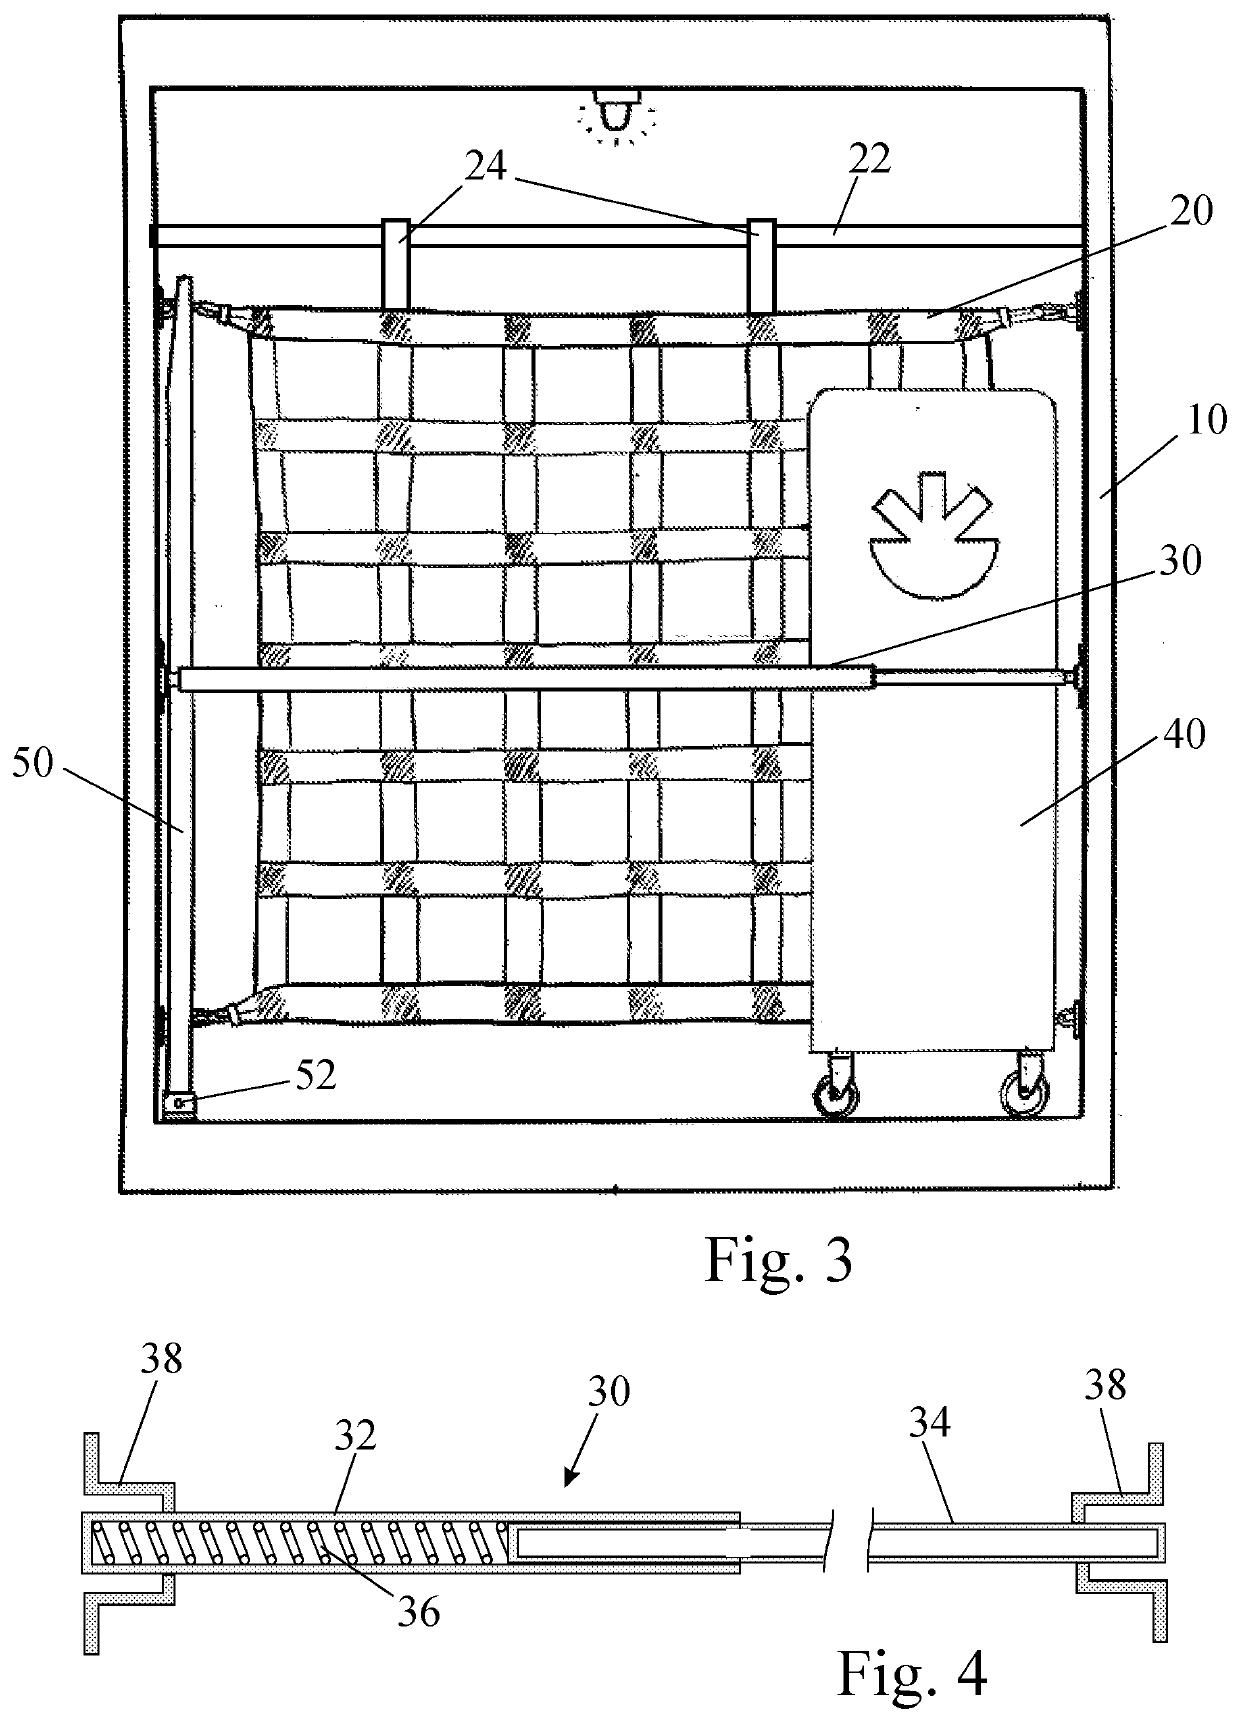 Transportable refrigerated container and method of distribution of perishable goods